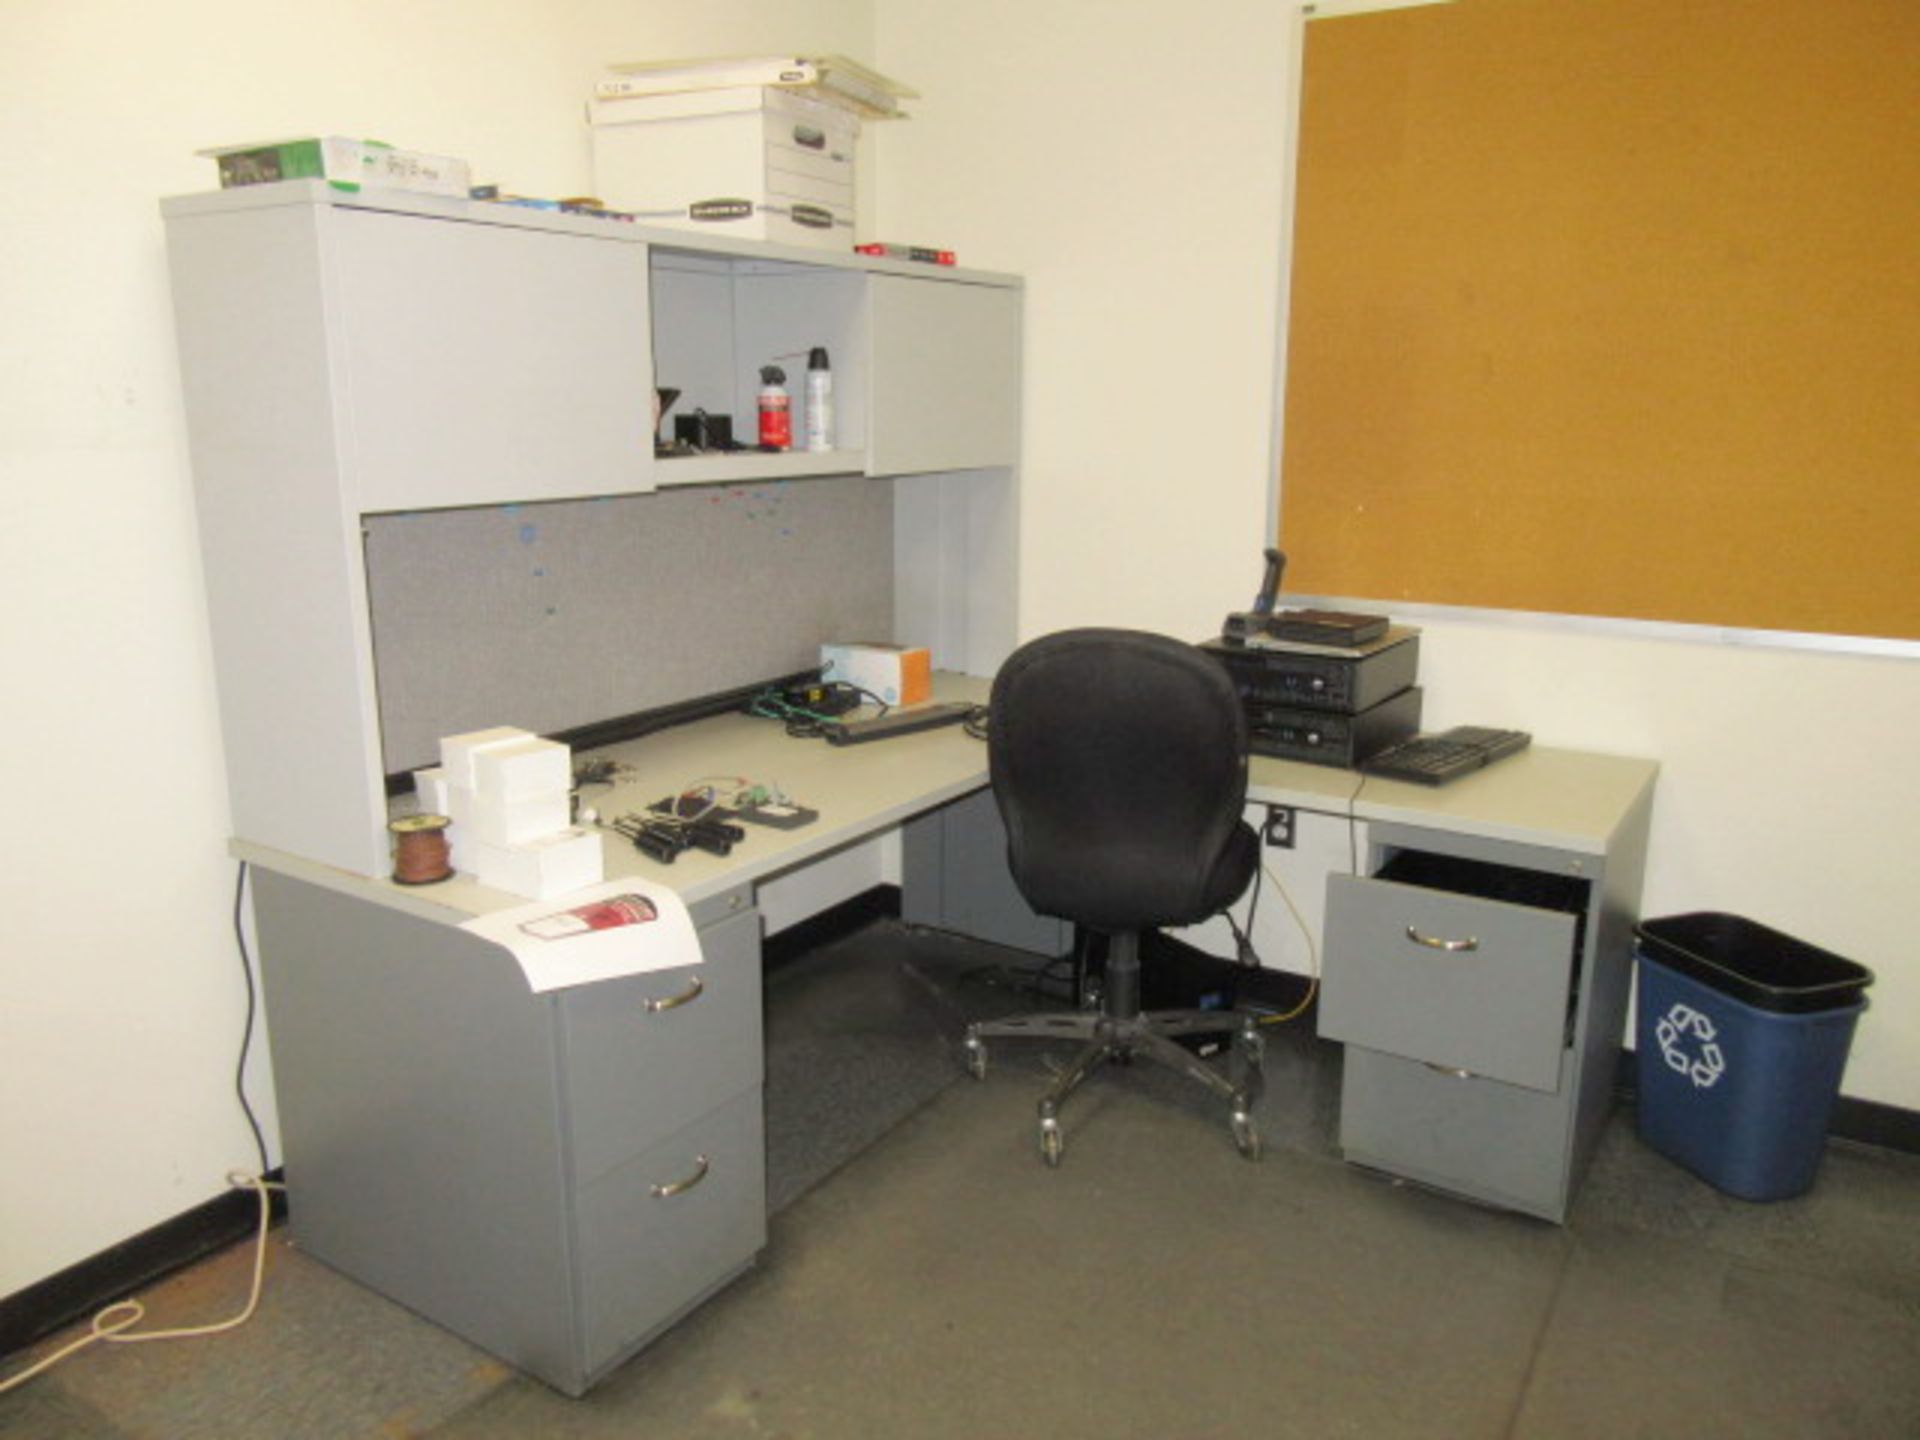 Contents of Office, Consisting of: (1) Desk 72"L x 30"W with Hutch & 42" Right Return, (3) 48"L x